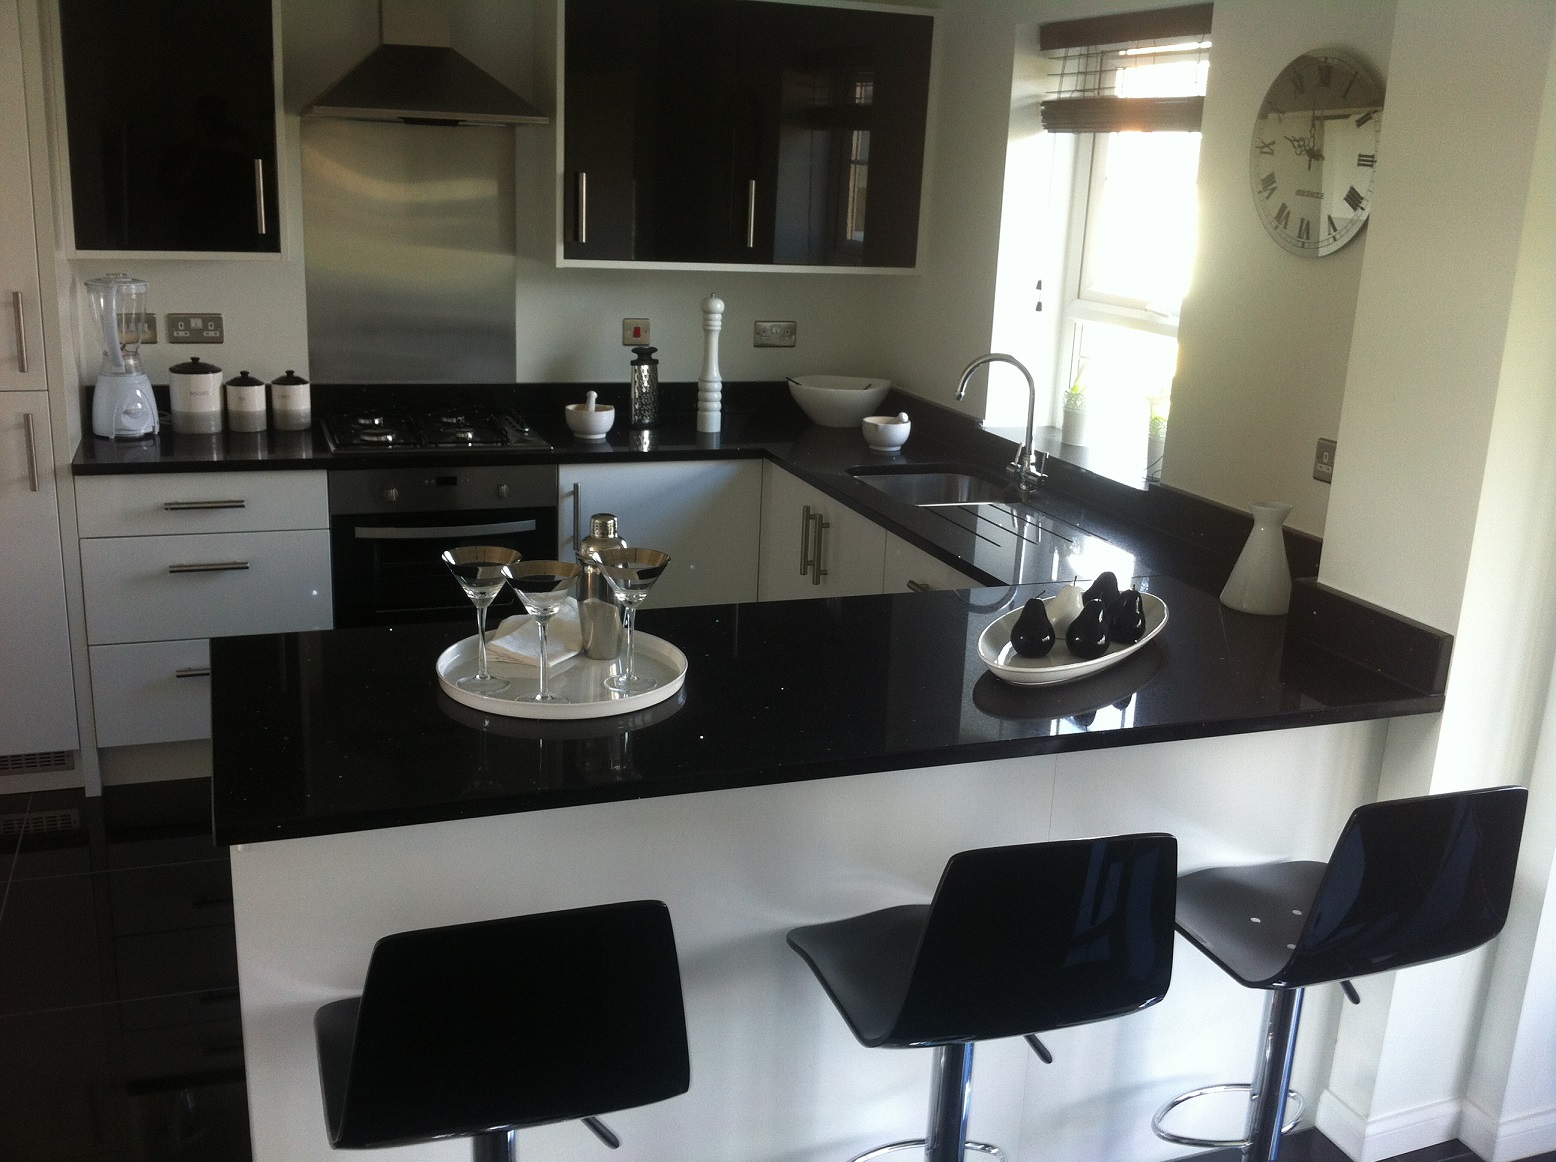 We supply Granite and Quartz Worktops in the penrith Area. We supply Granite and Quartz Worktops in the Carlisle Area. We supply Granite and Quartz Worktops in the Kendal Area. We supply Granite and Quartz Worktops in the Keswick Area. We supply Granite and Quartz Worktops in the Windermere Area. We supply Granite and Quartz Worktops in the Ambleside Area. We supply Granite and Quartz Worktops in the Cockermouth Area. We supply Granite and Quartz Worktops in the Barrow-in-Furness Area. We supply Granite and Quartz Worktops in the Whitehaven Area. We supply Granite and Quartz Worktops in the Mayport Area. We supply Granite and Quartz Worktops in the Ulverston Area. We supply Granite and Quartz Worktops in the Kirkby-Stephen Area. We supply Granite and Quartz Worktops in the Workington Area. We supply Granite and Quartz Worktops in the Hawes Area. We supply Granite and Quartz Worktops in the Sedbergh Area. We supply Granite and Quartz Worktops in the Ingleton Area. We supply Granite and Quartz Worktops in the Milnthorpe Area. We supply Granite and Quartz Worktops in the Burton-in-Kendal Area. We supply Granite and Quartz Worktops in the Seascale Area. We supply Granite and Quartz Worktops in the Gosforth Area. We supply Granite and Quartz Worktops in the Wigton Area.